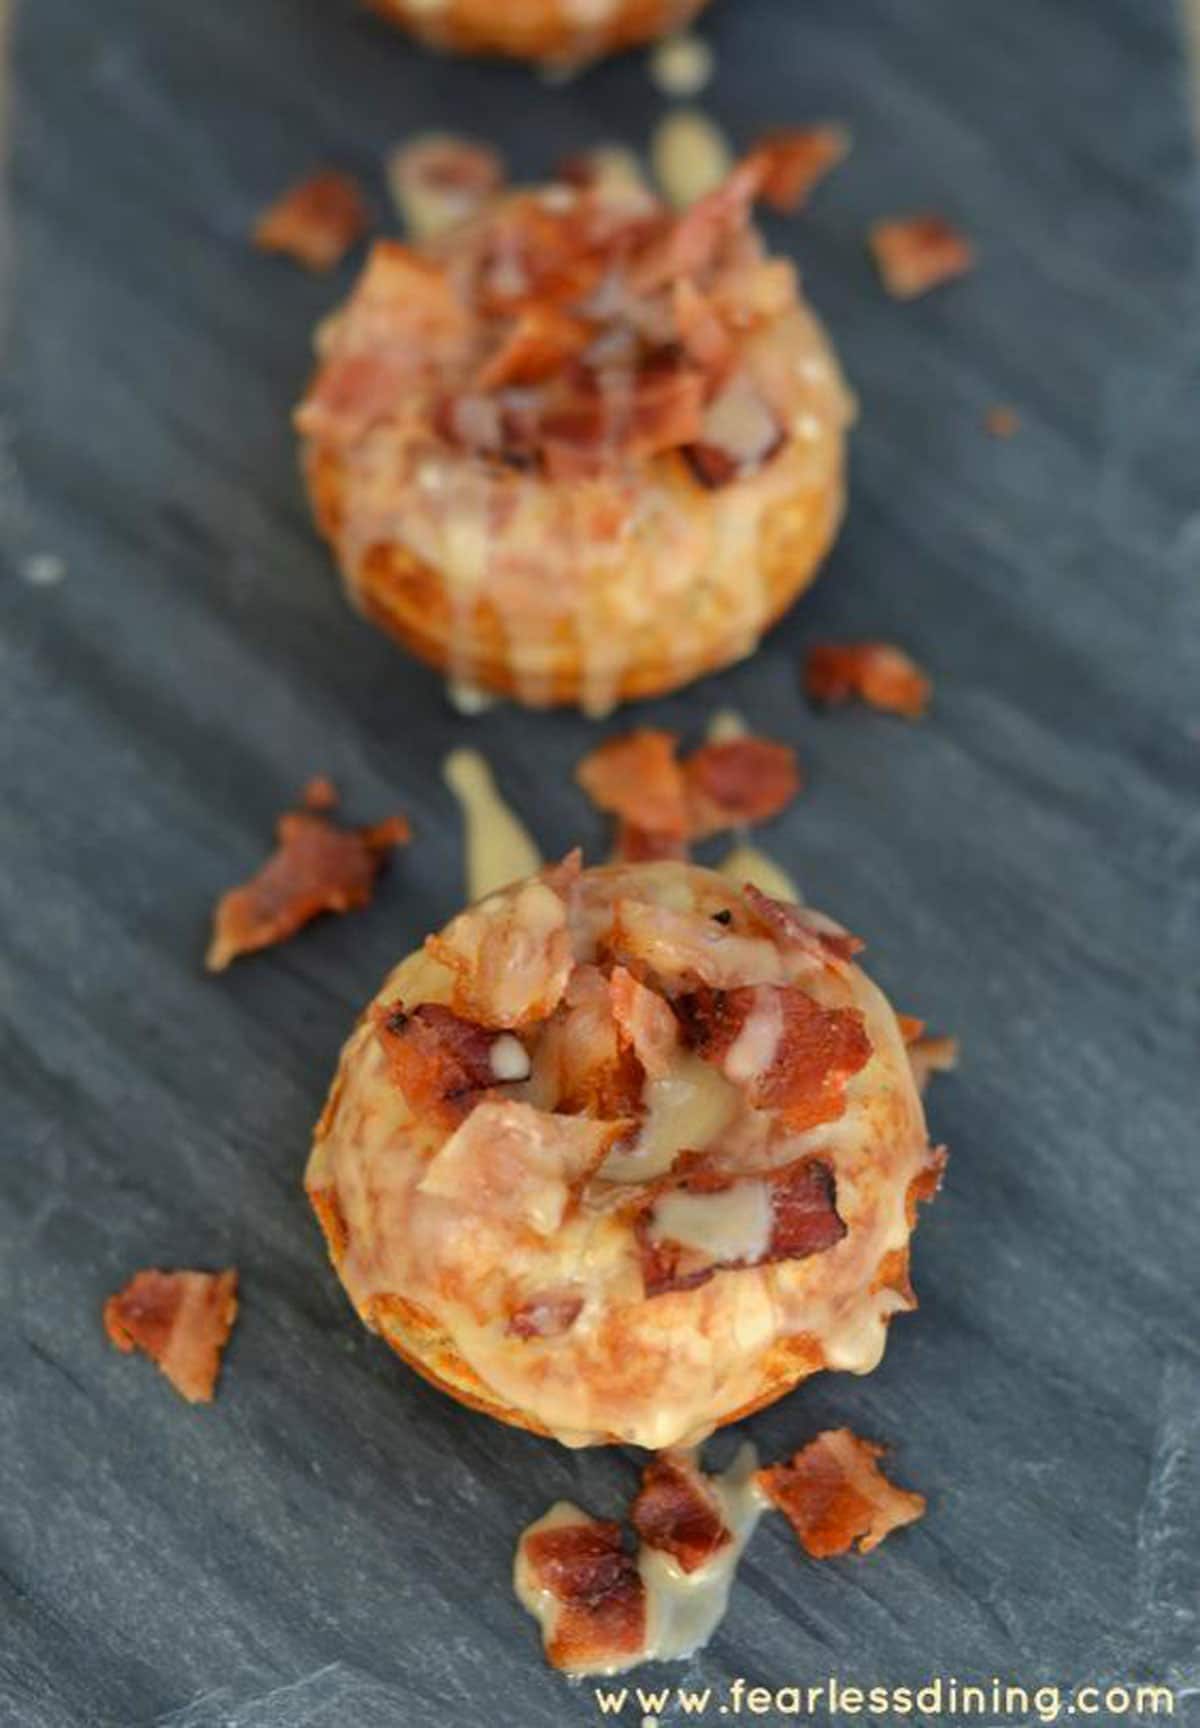 Two maple bacon donuts on a slate serving dish.